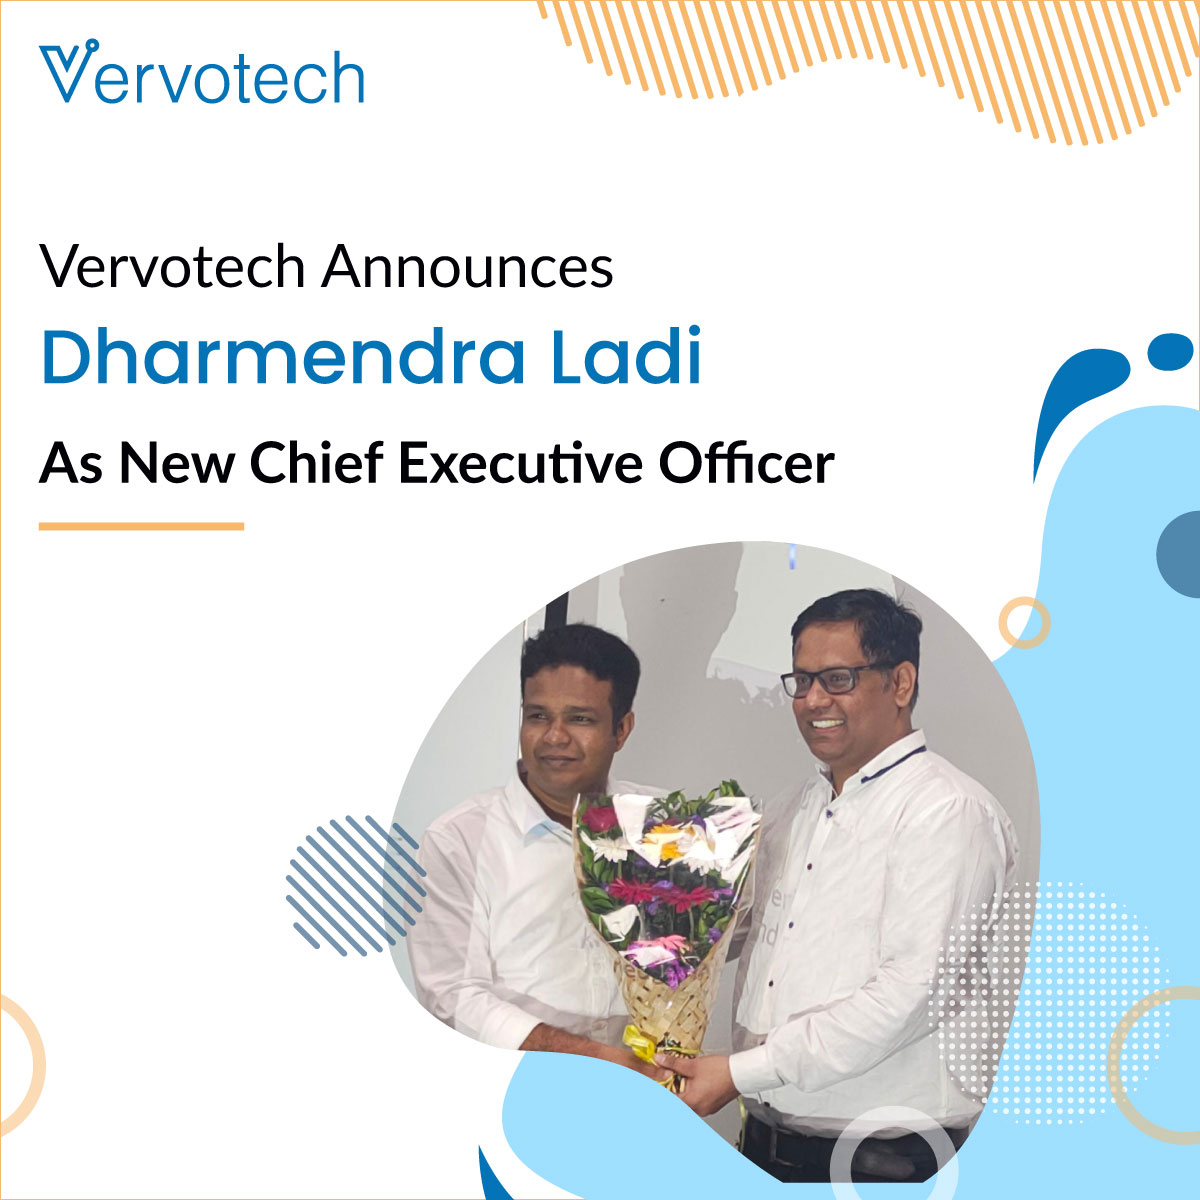 Vervotech Announces Promotion of Dharmendra Ladi to Chief Executive Officer